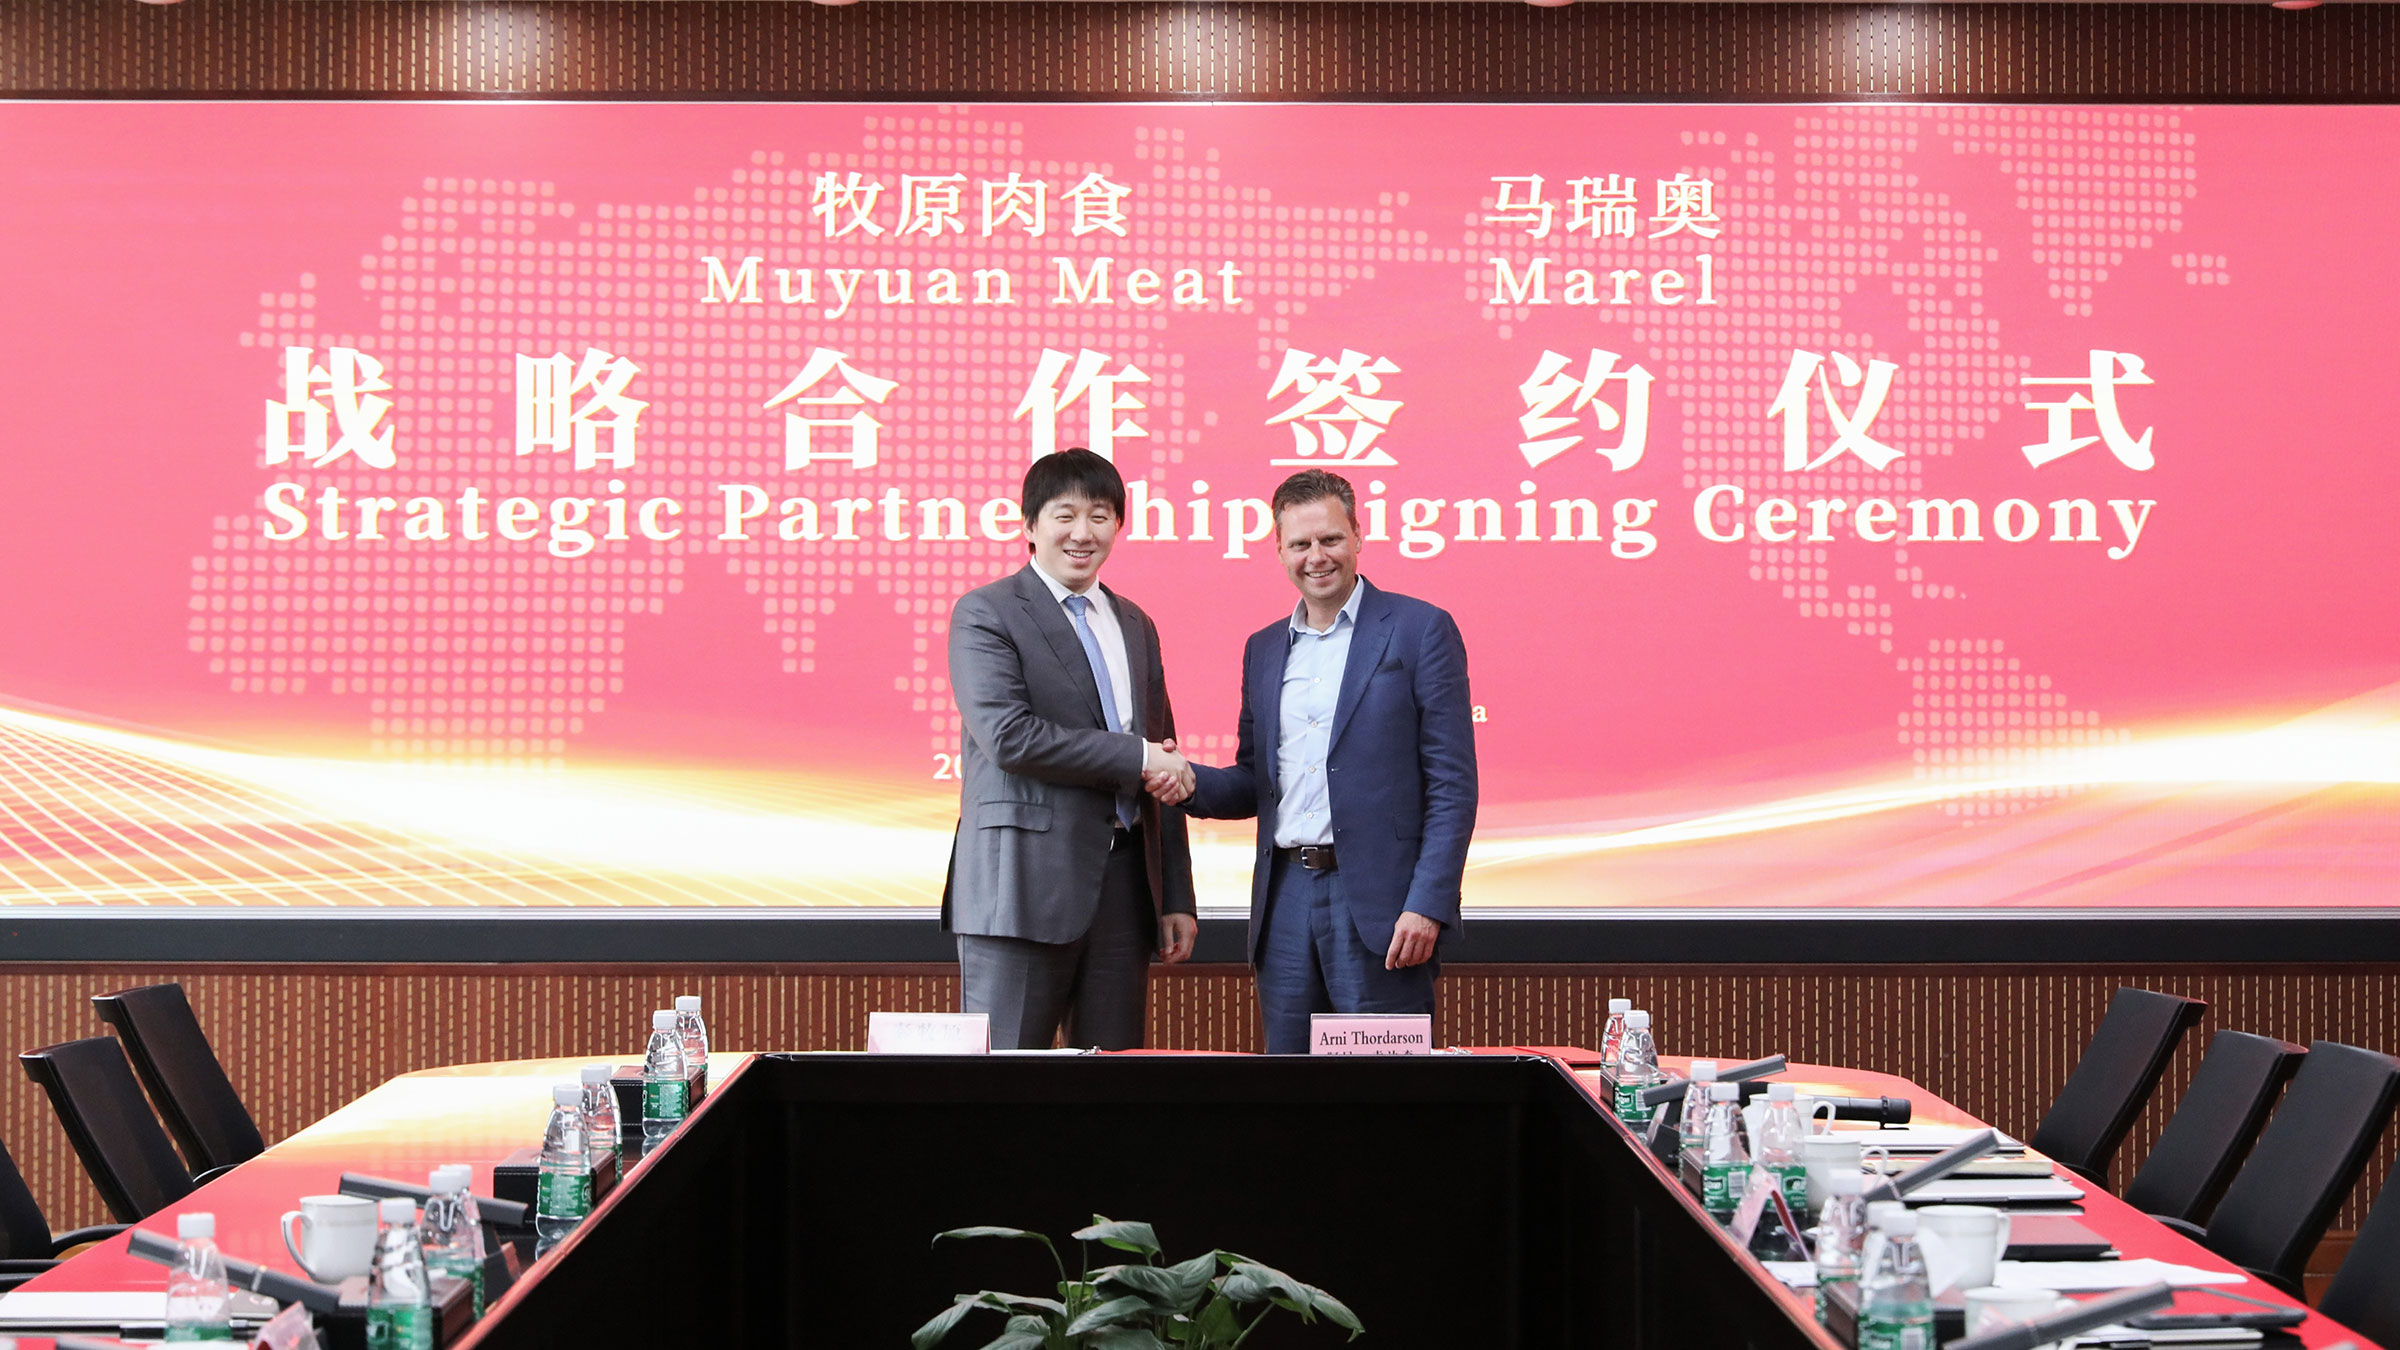 Marel and Muyuan sign long-term strategic partnership to accelerate the transformation of China’s pork industry